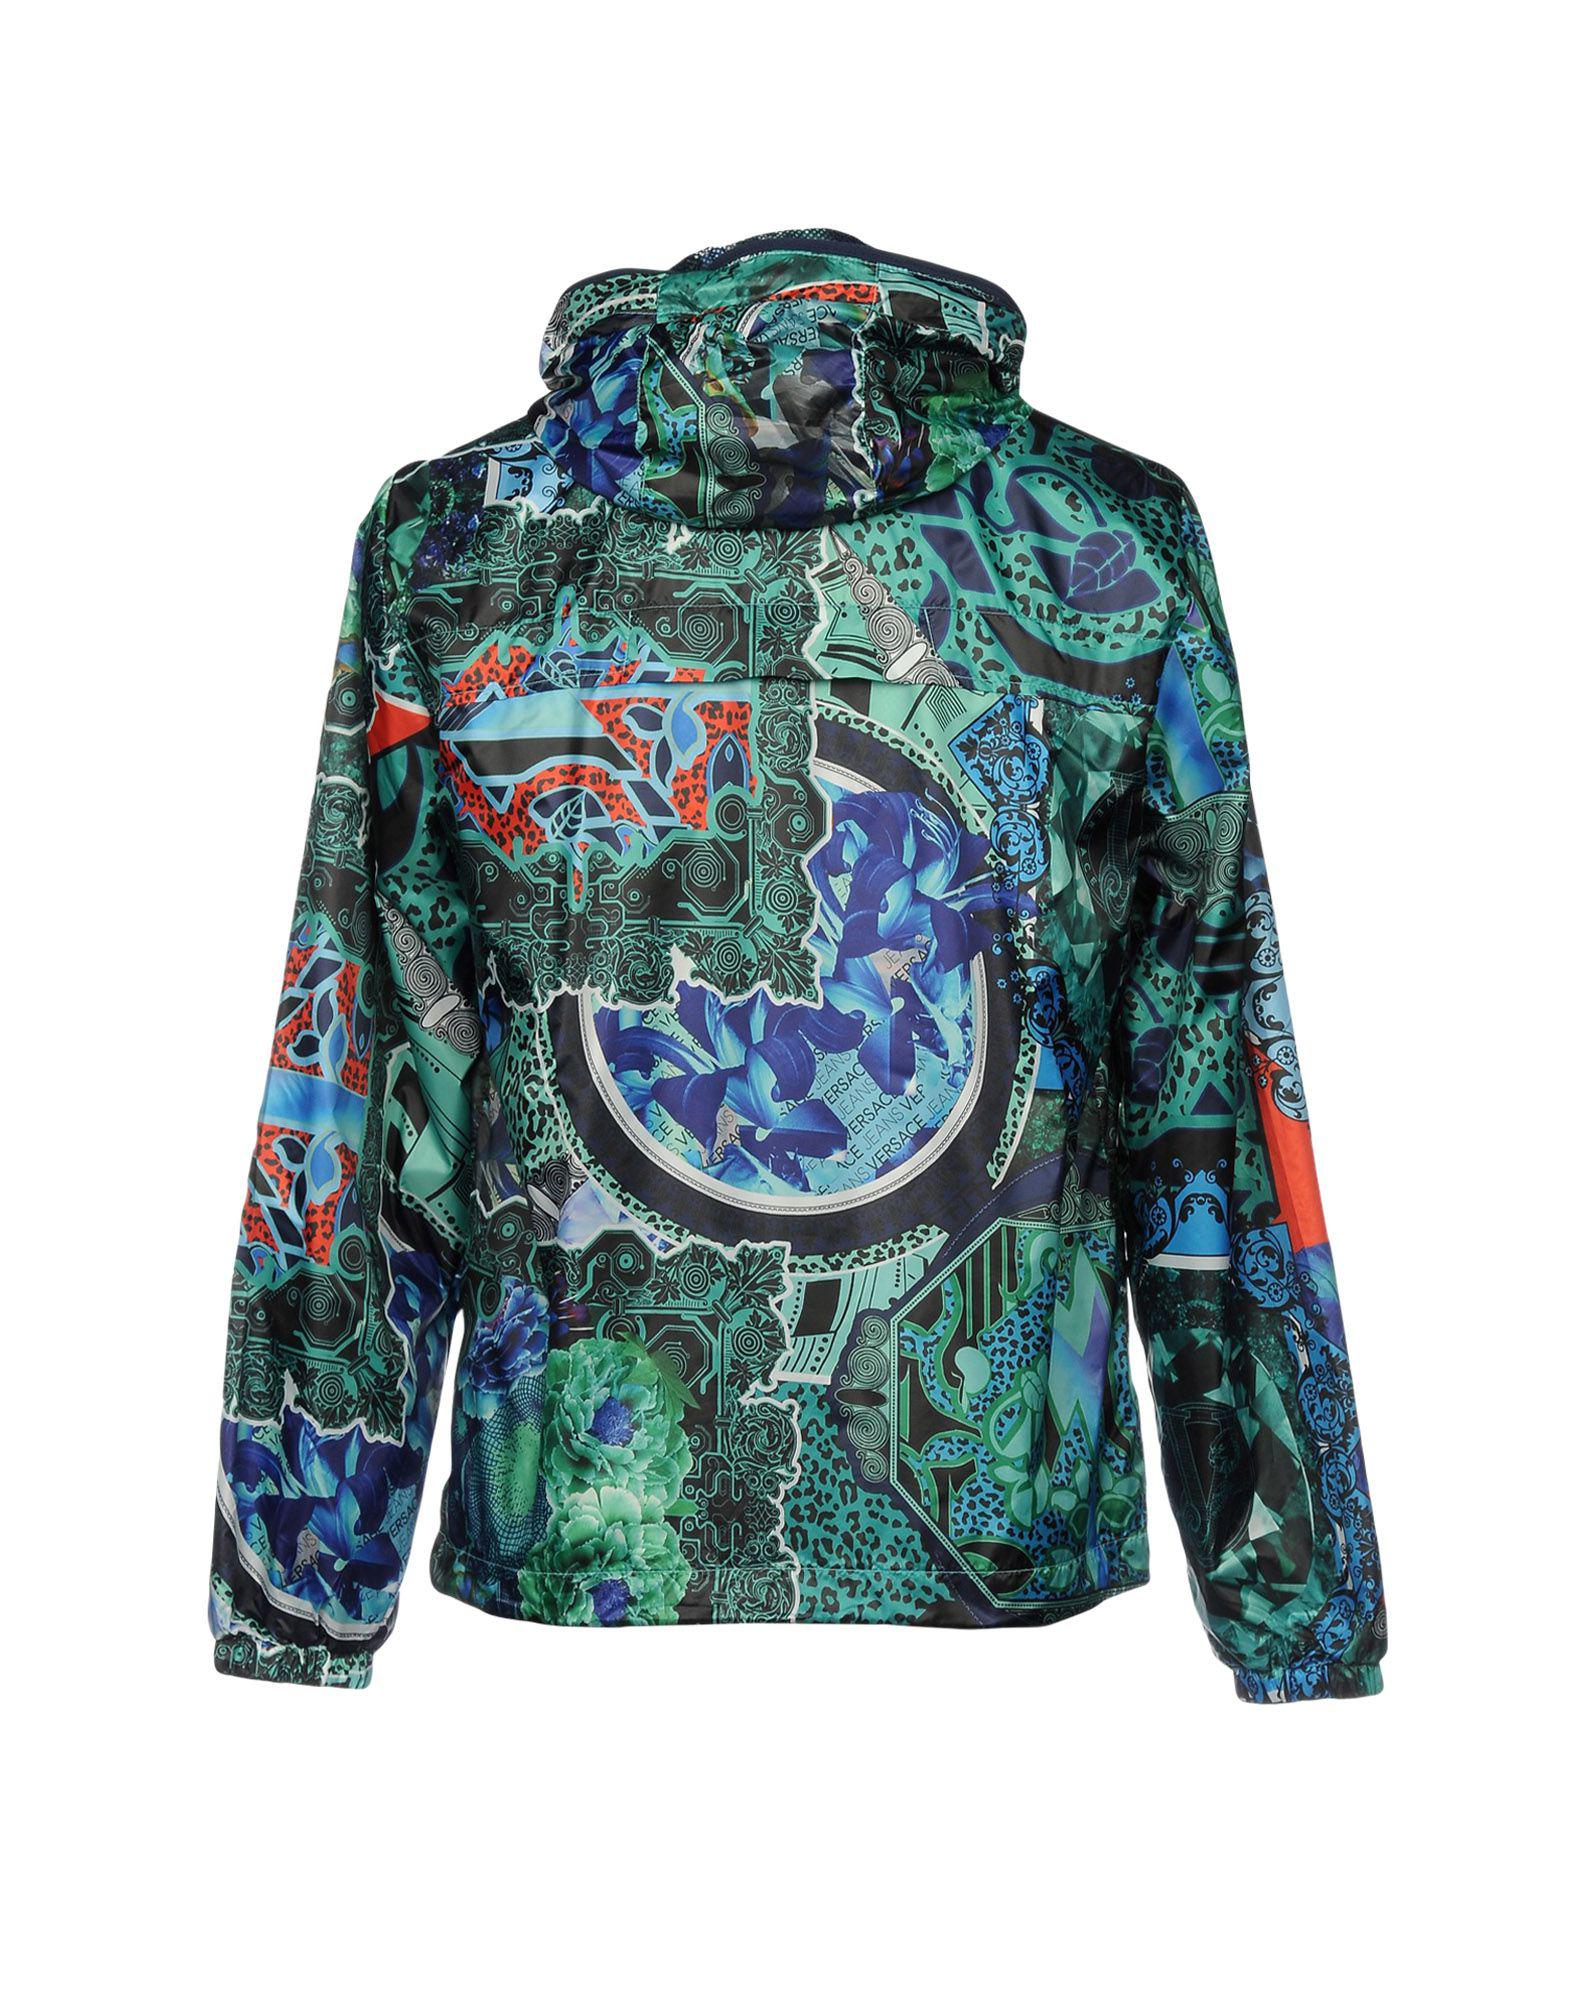 Versace Jeans Synthetic Jacket in Green for Men - Lyst